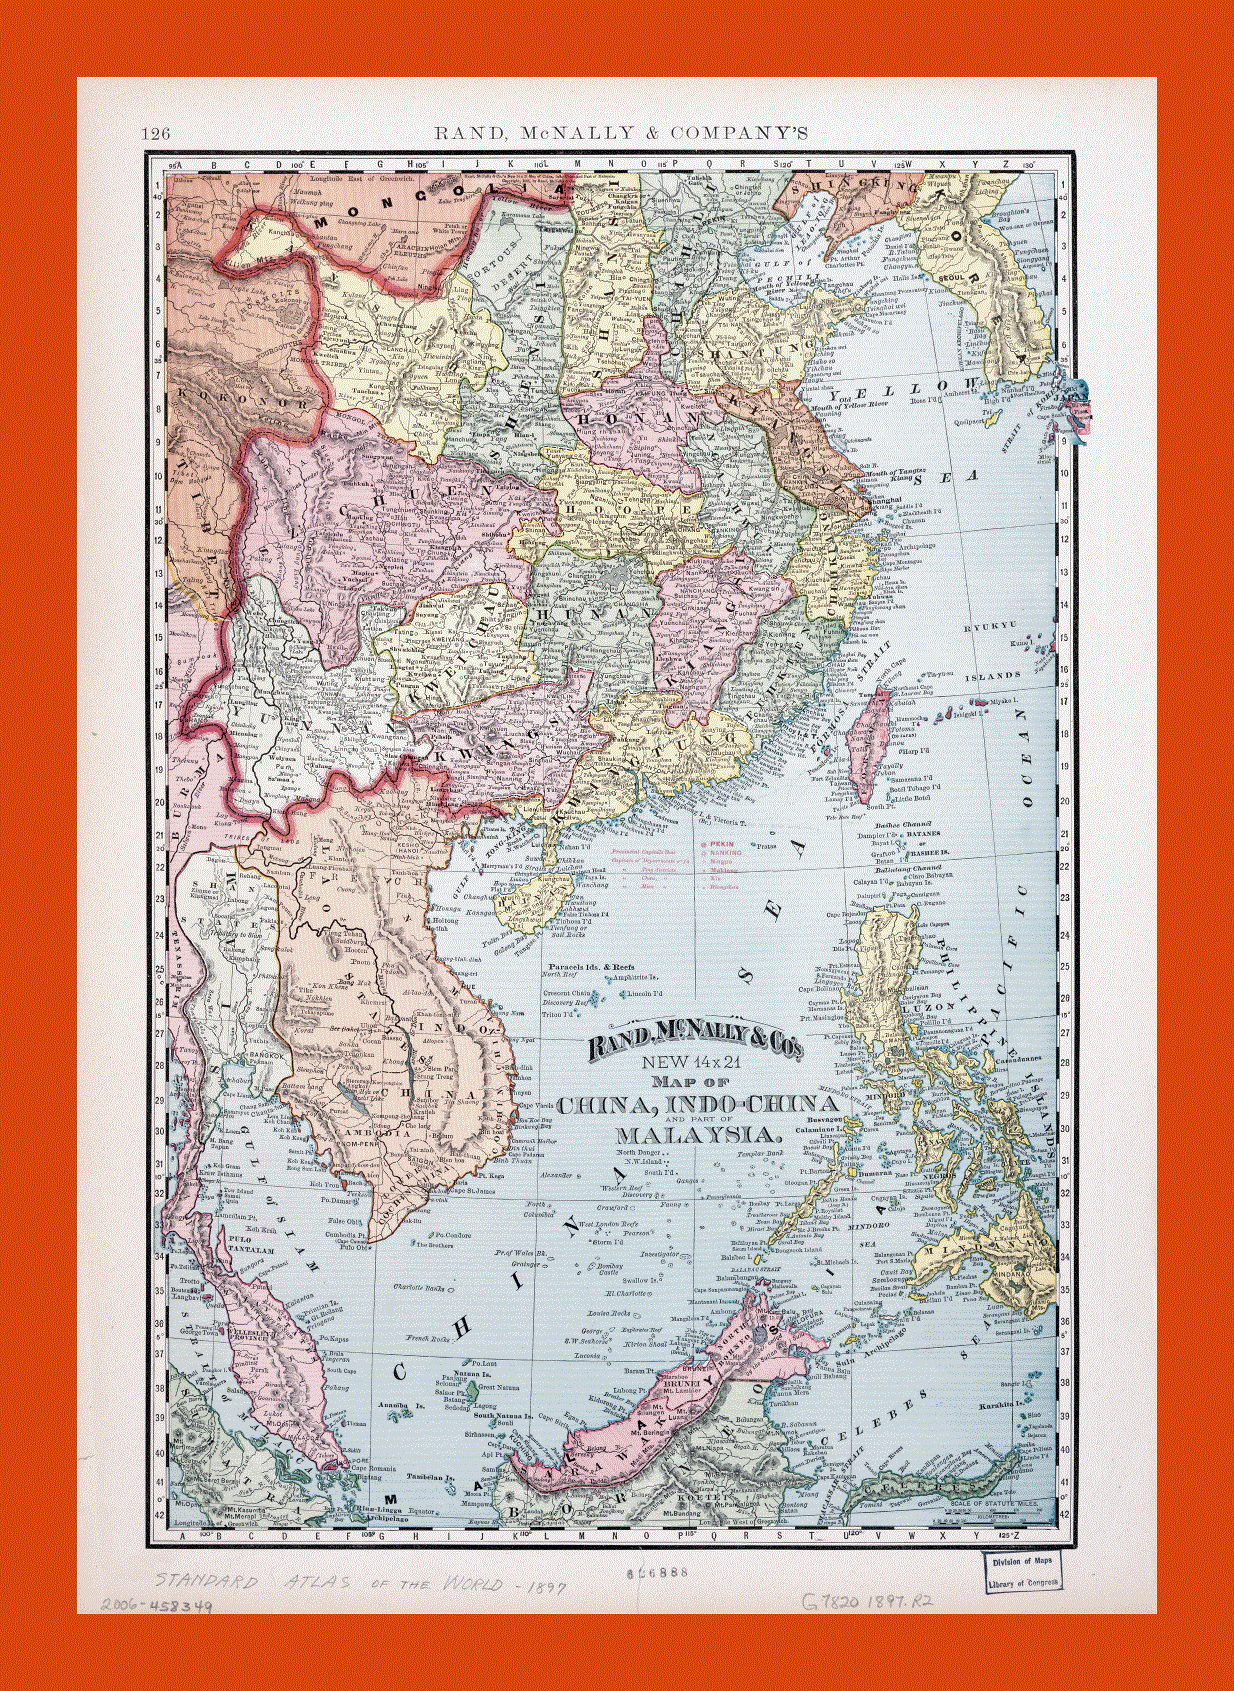 Old political map of China, Indochina and part of Malasysia - 1897